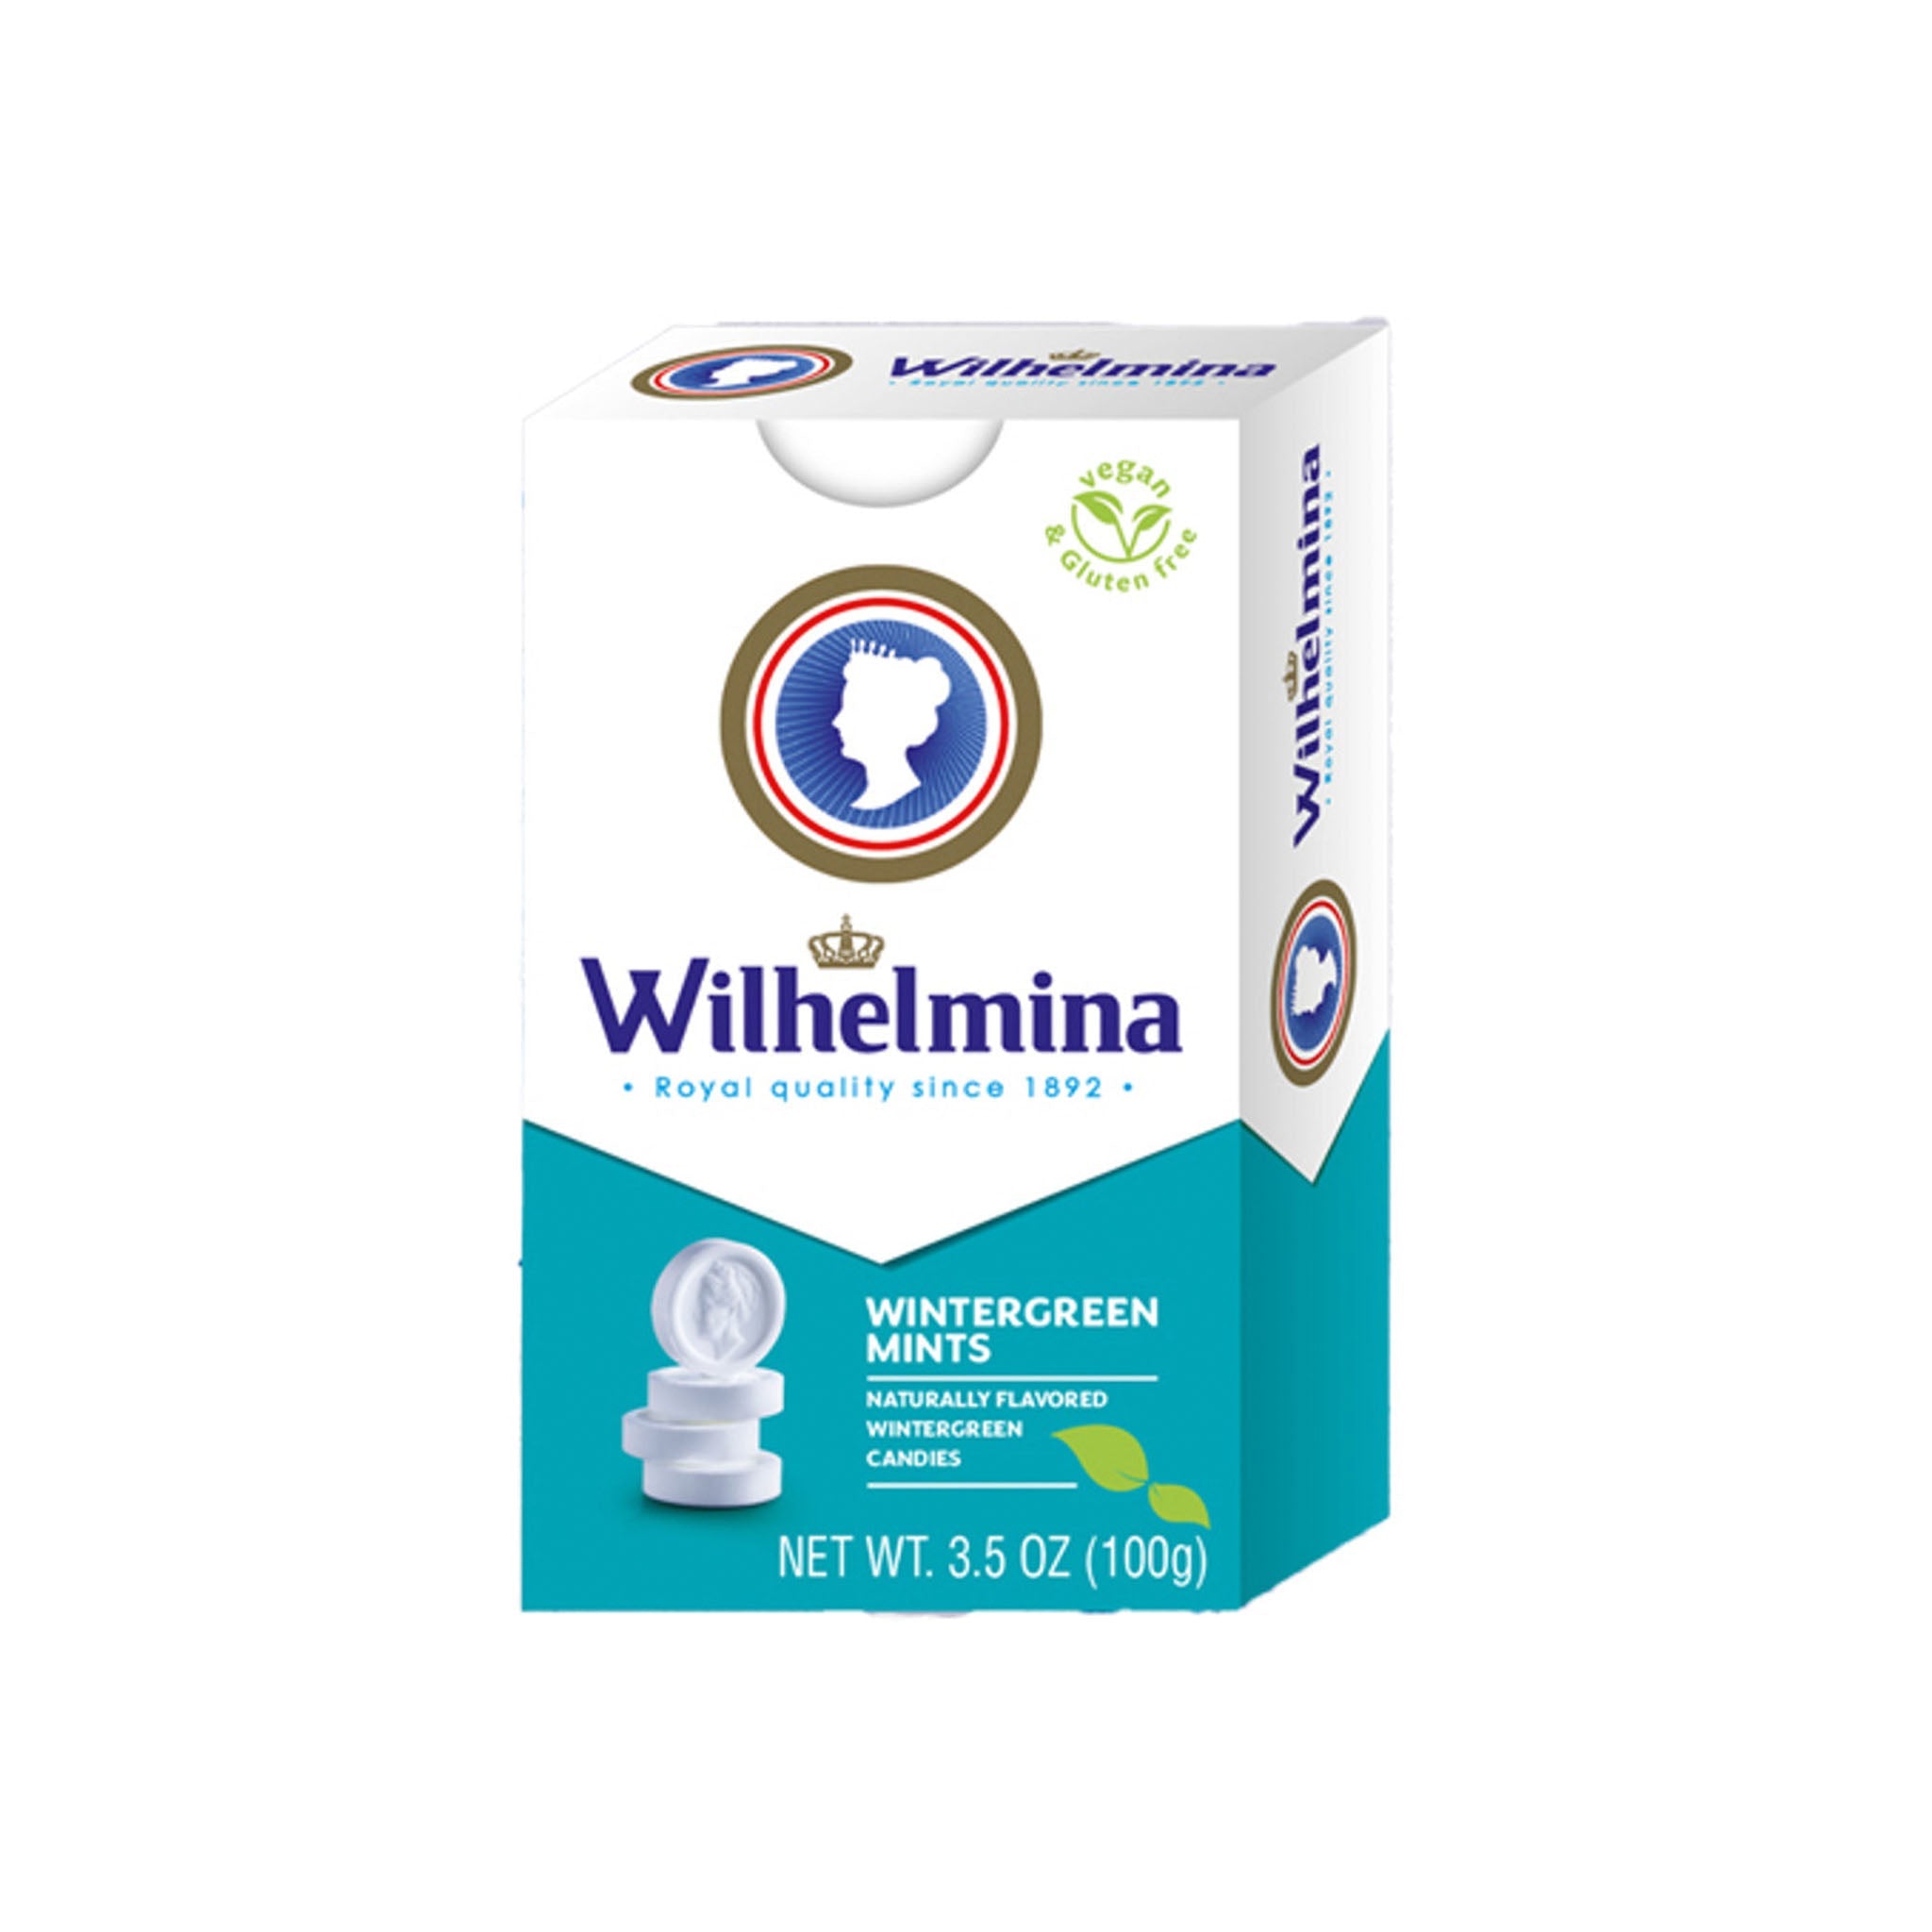 Fortuin's Wilhelmina Wintergreen Mint Drops have been a cherished favorite for over a century!